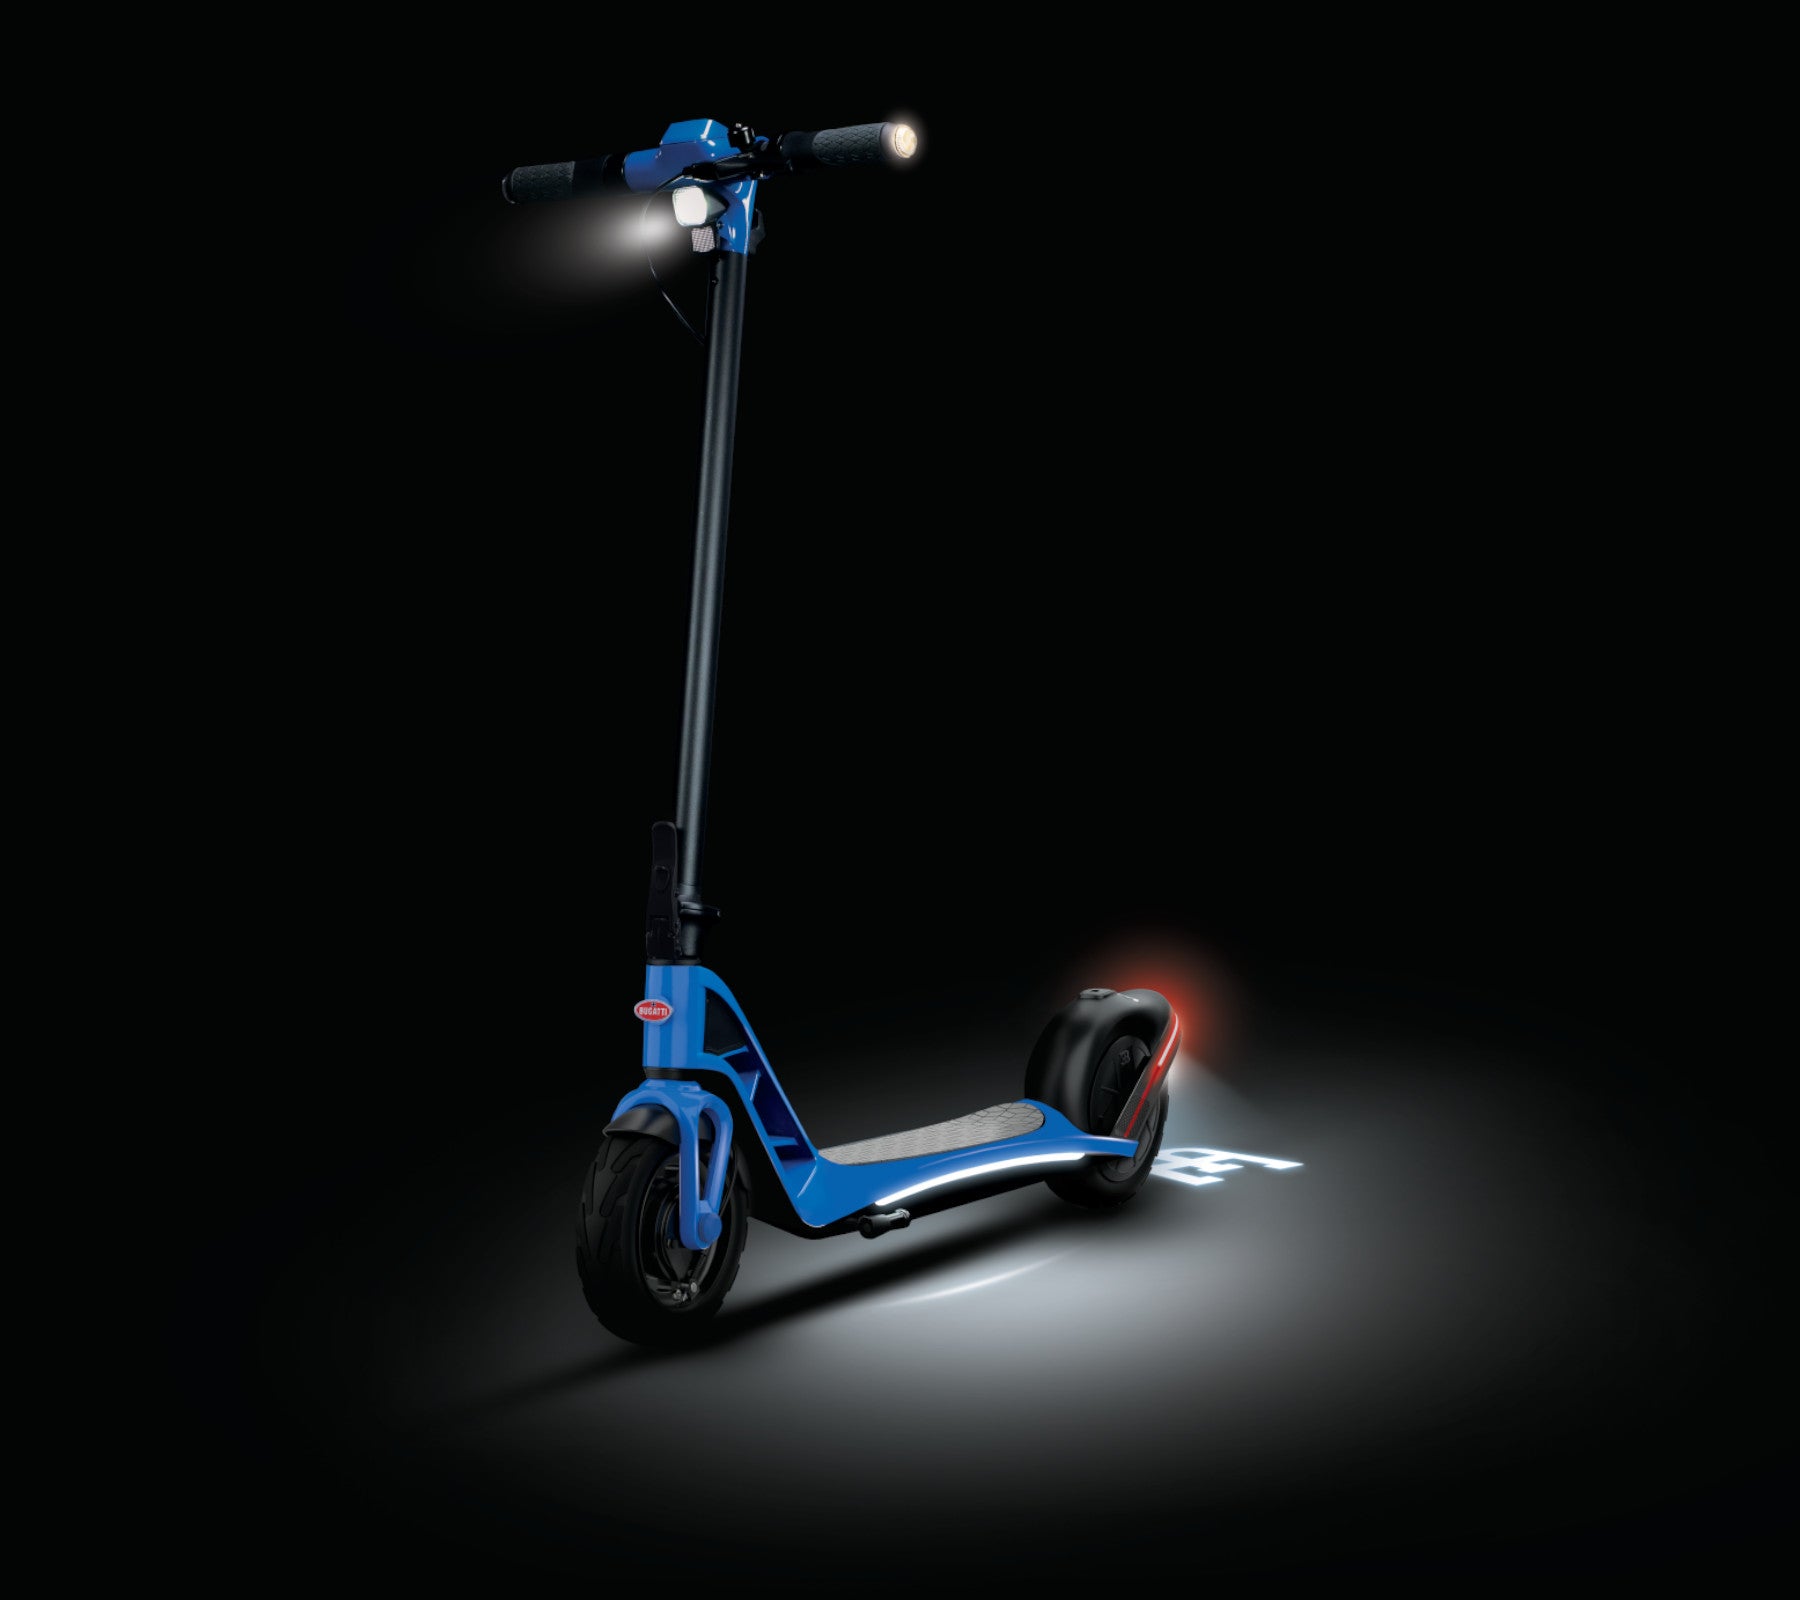 Bugatti Scooter 2 - Bugatti's first electric vehicle has 0,94 HP, Top Speed 18.5 MPH, and range 22 miles